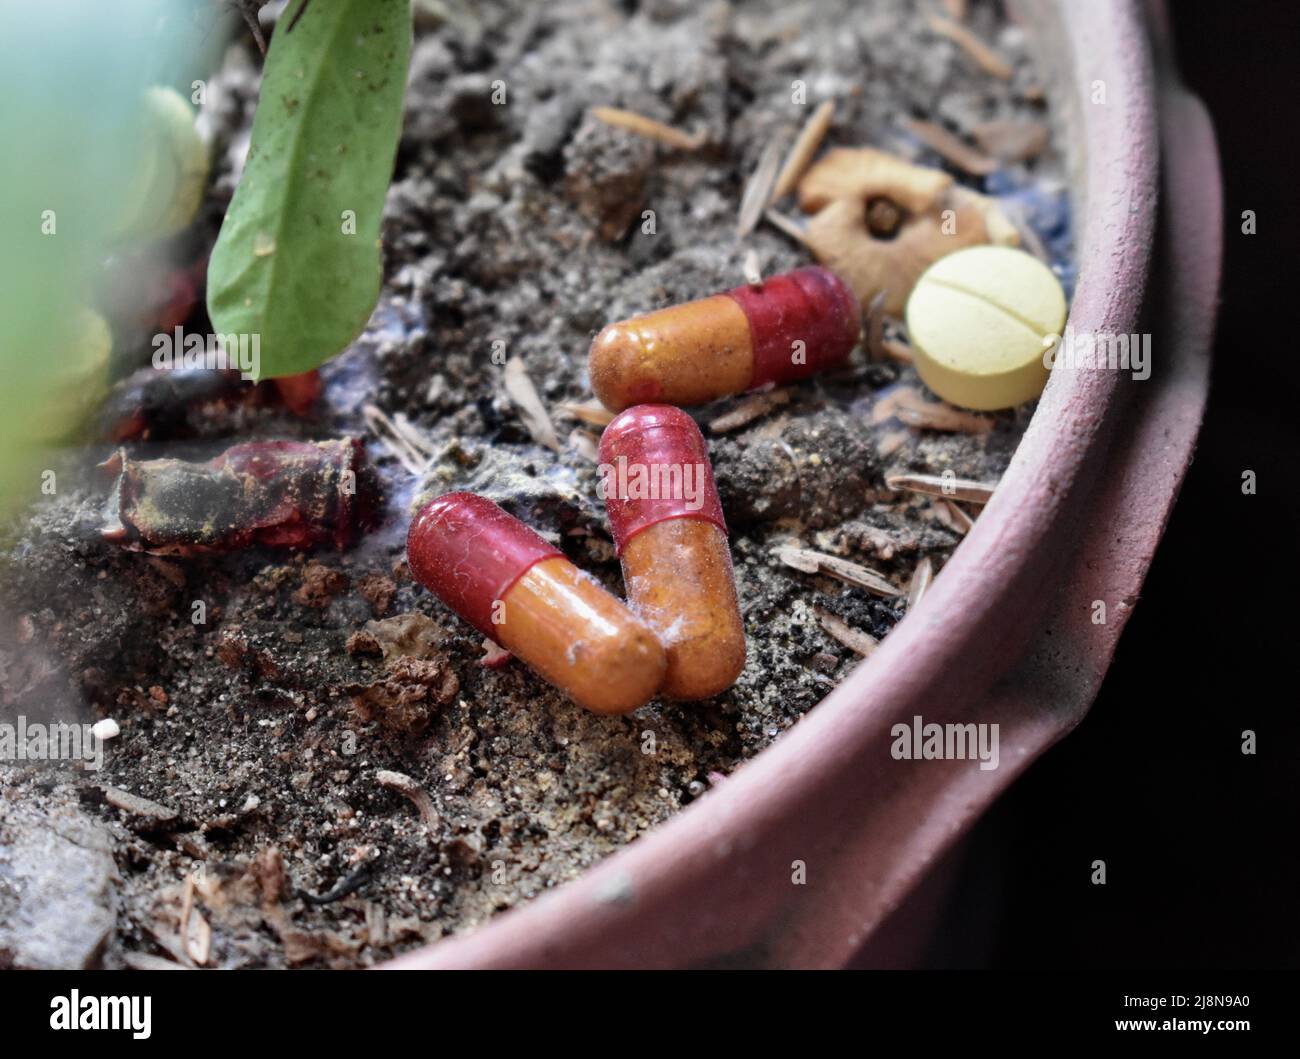 Expired medicine used as fertilizer. Closeup view. Stock Photo